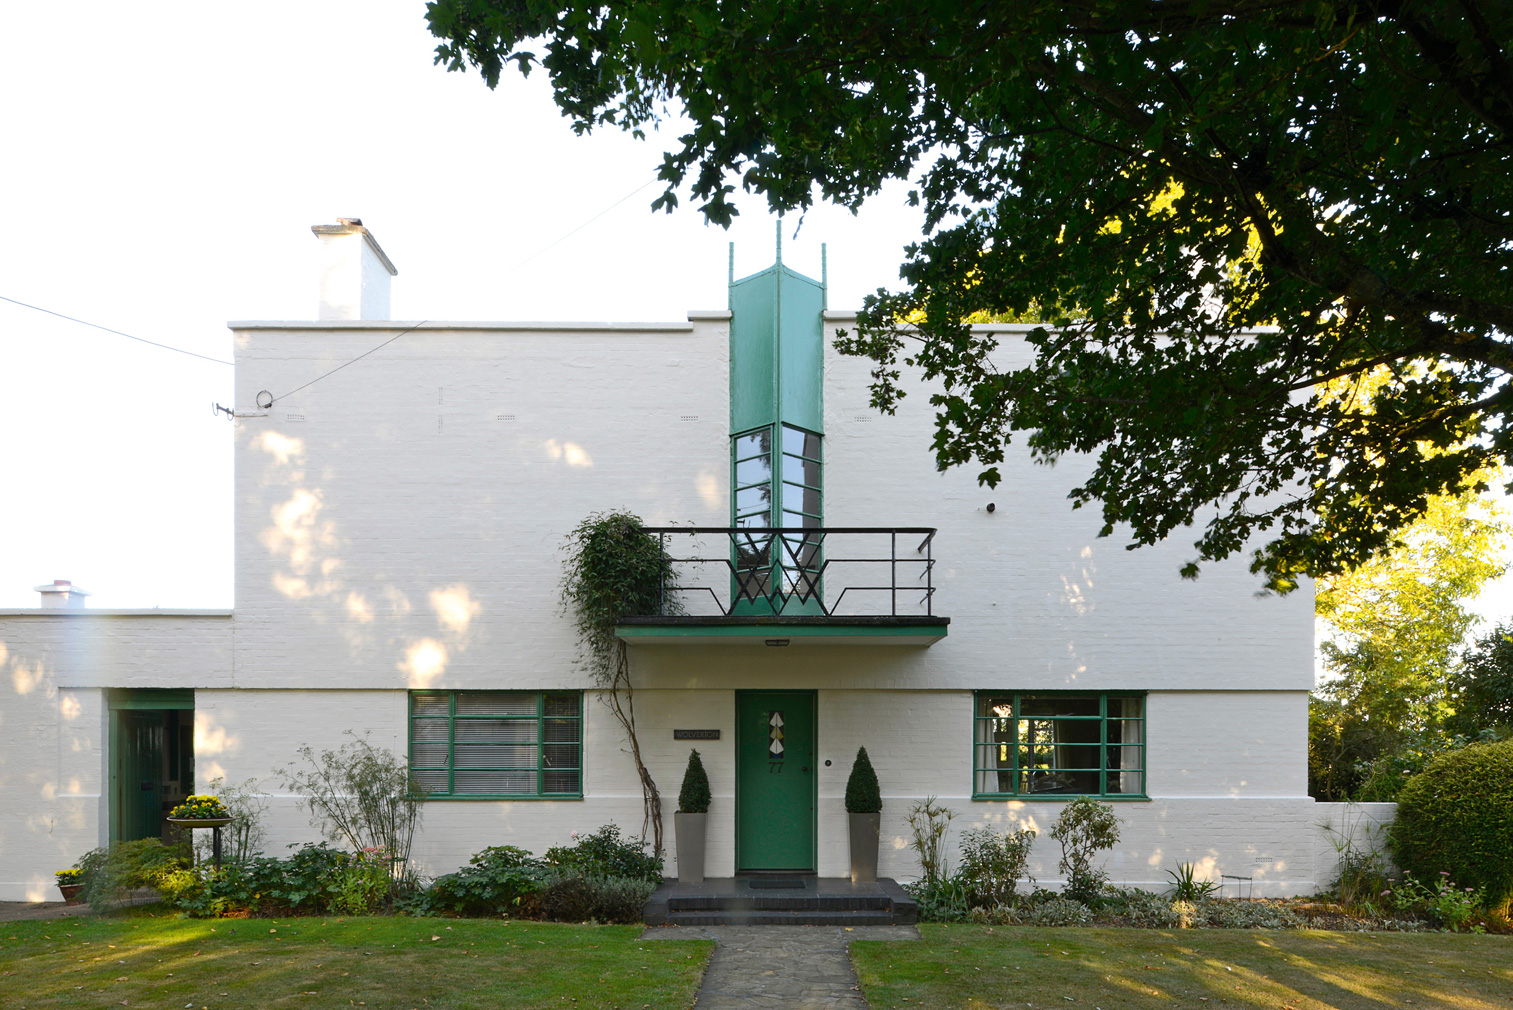 Wolverton House in Essex by architects Thomas Tait and Frederick McManus (1927). Photography: Elain Harwood (c) 2019